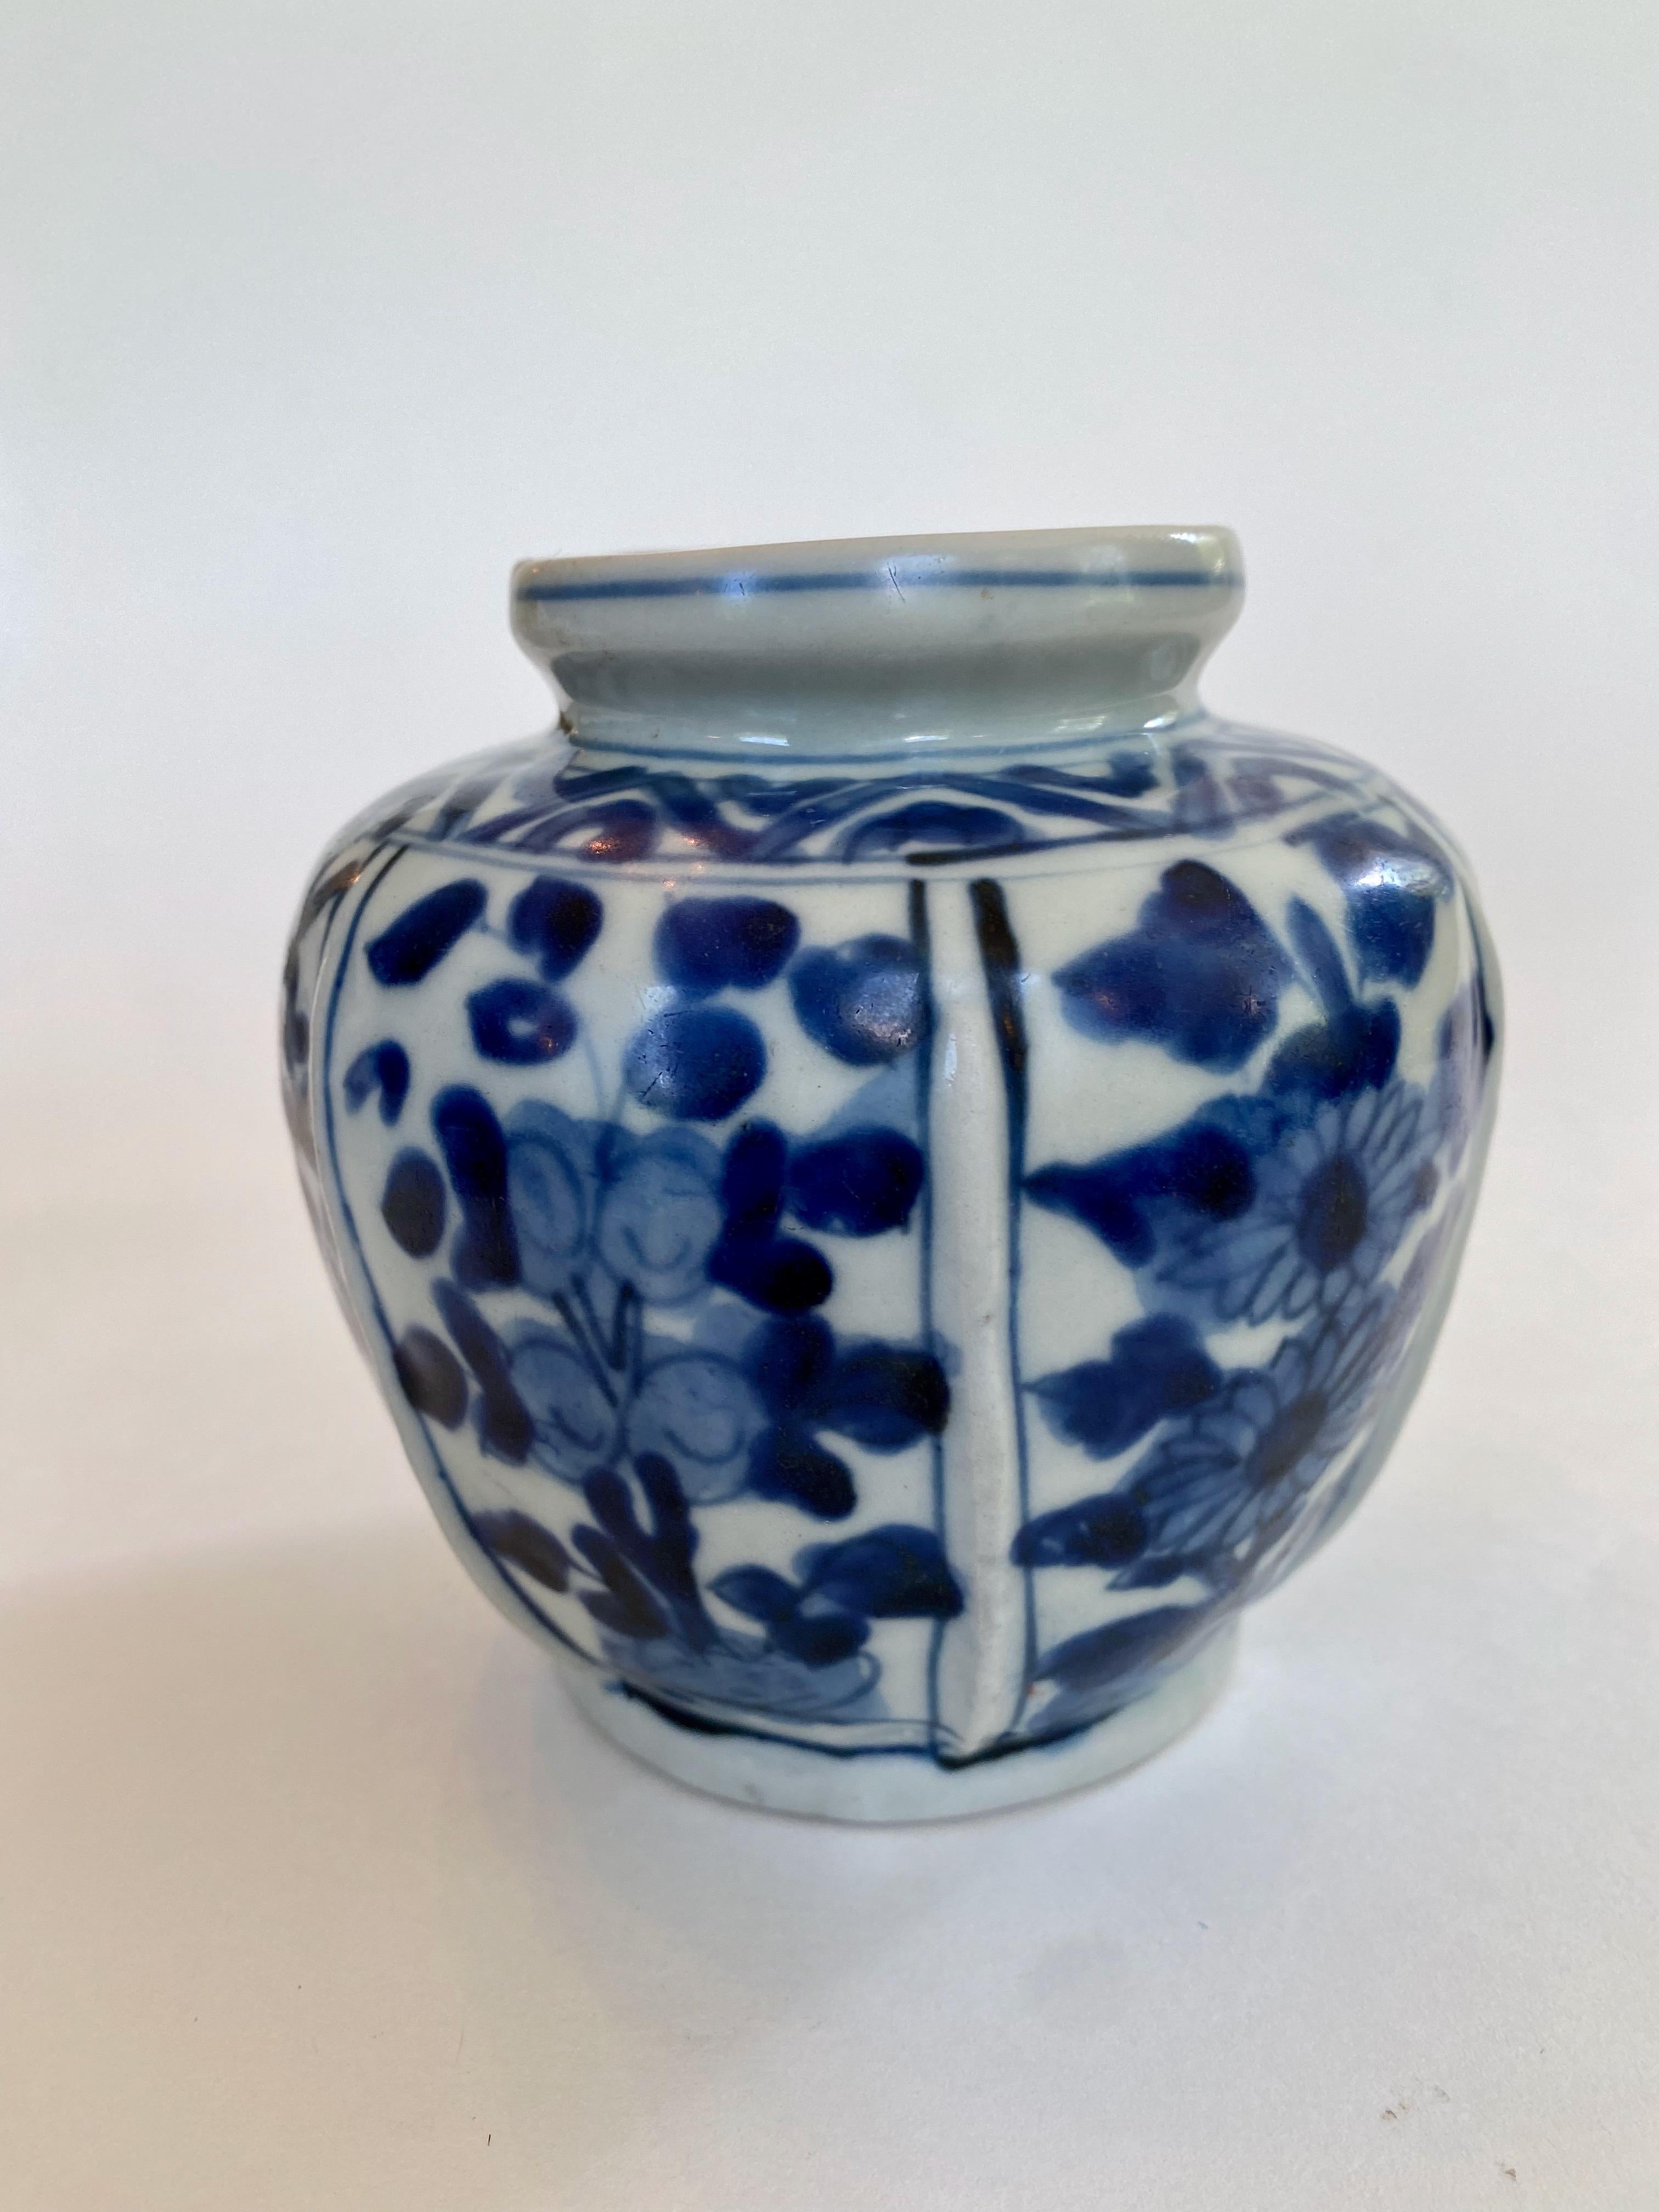 Ming Dynasty blue and white ribbed vase from the Wan Li period (1563-1620). The raised ridges on the body separate panels of boldly painted, stylized flowers, including sunflowers, in vibrant cobalt blue. The vase also has a geometric decorative